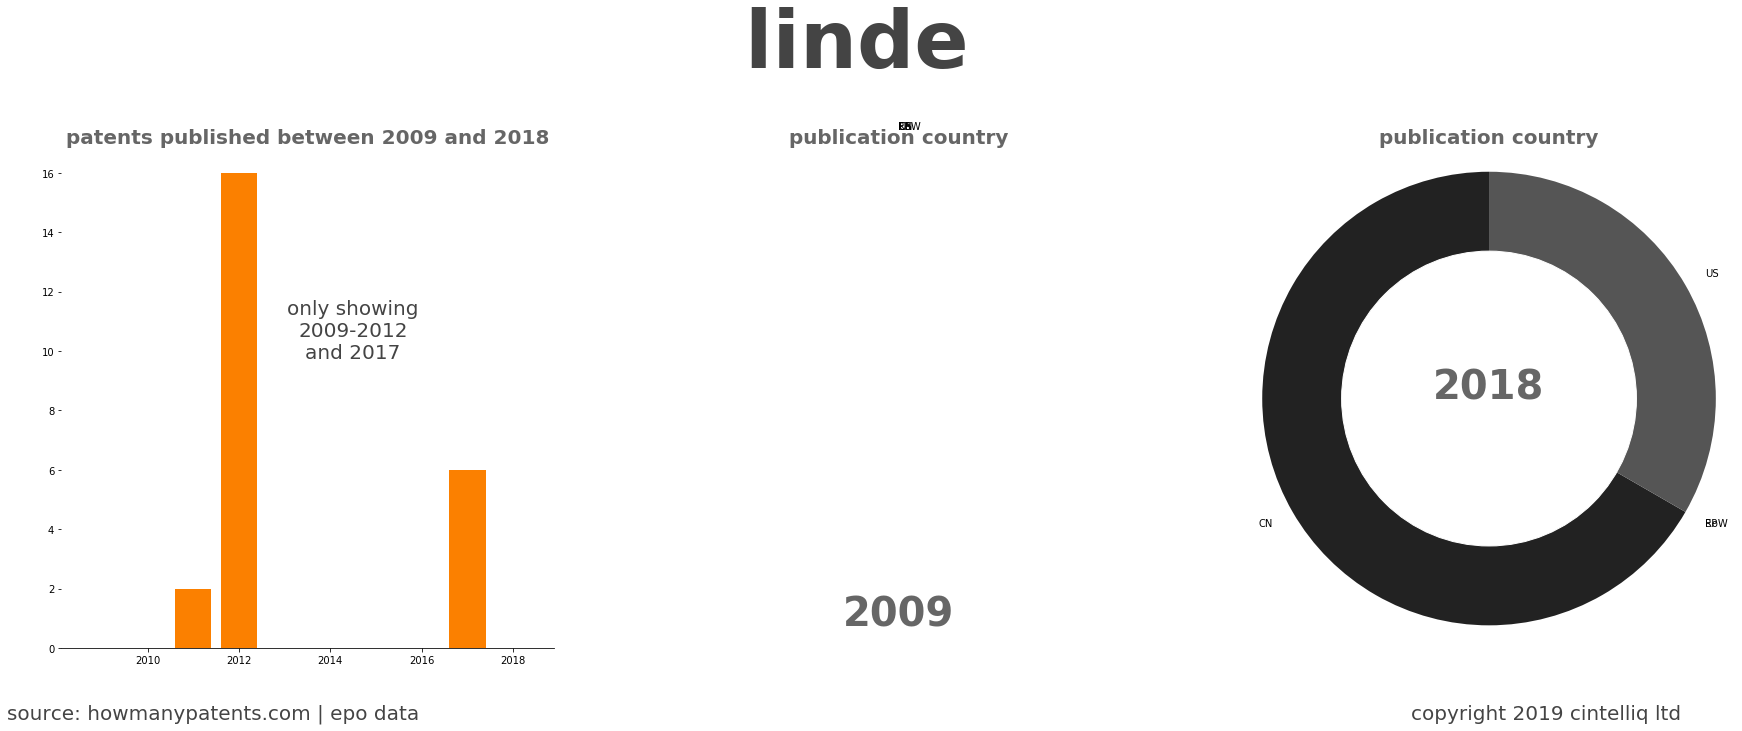 summary of patents for Linde 